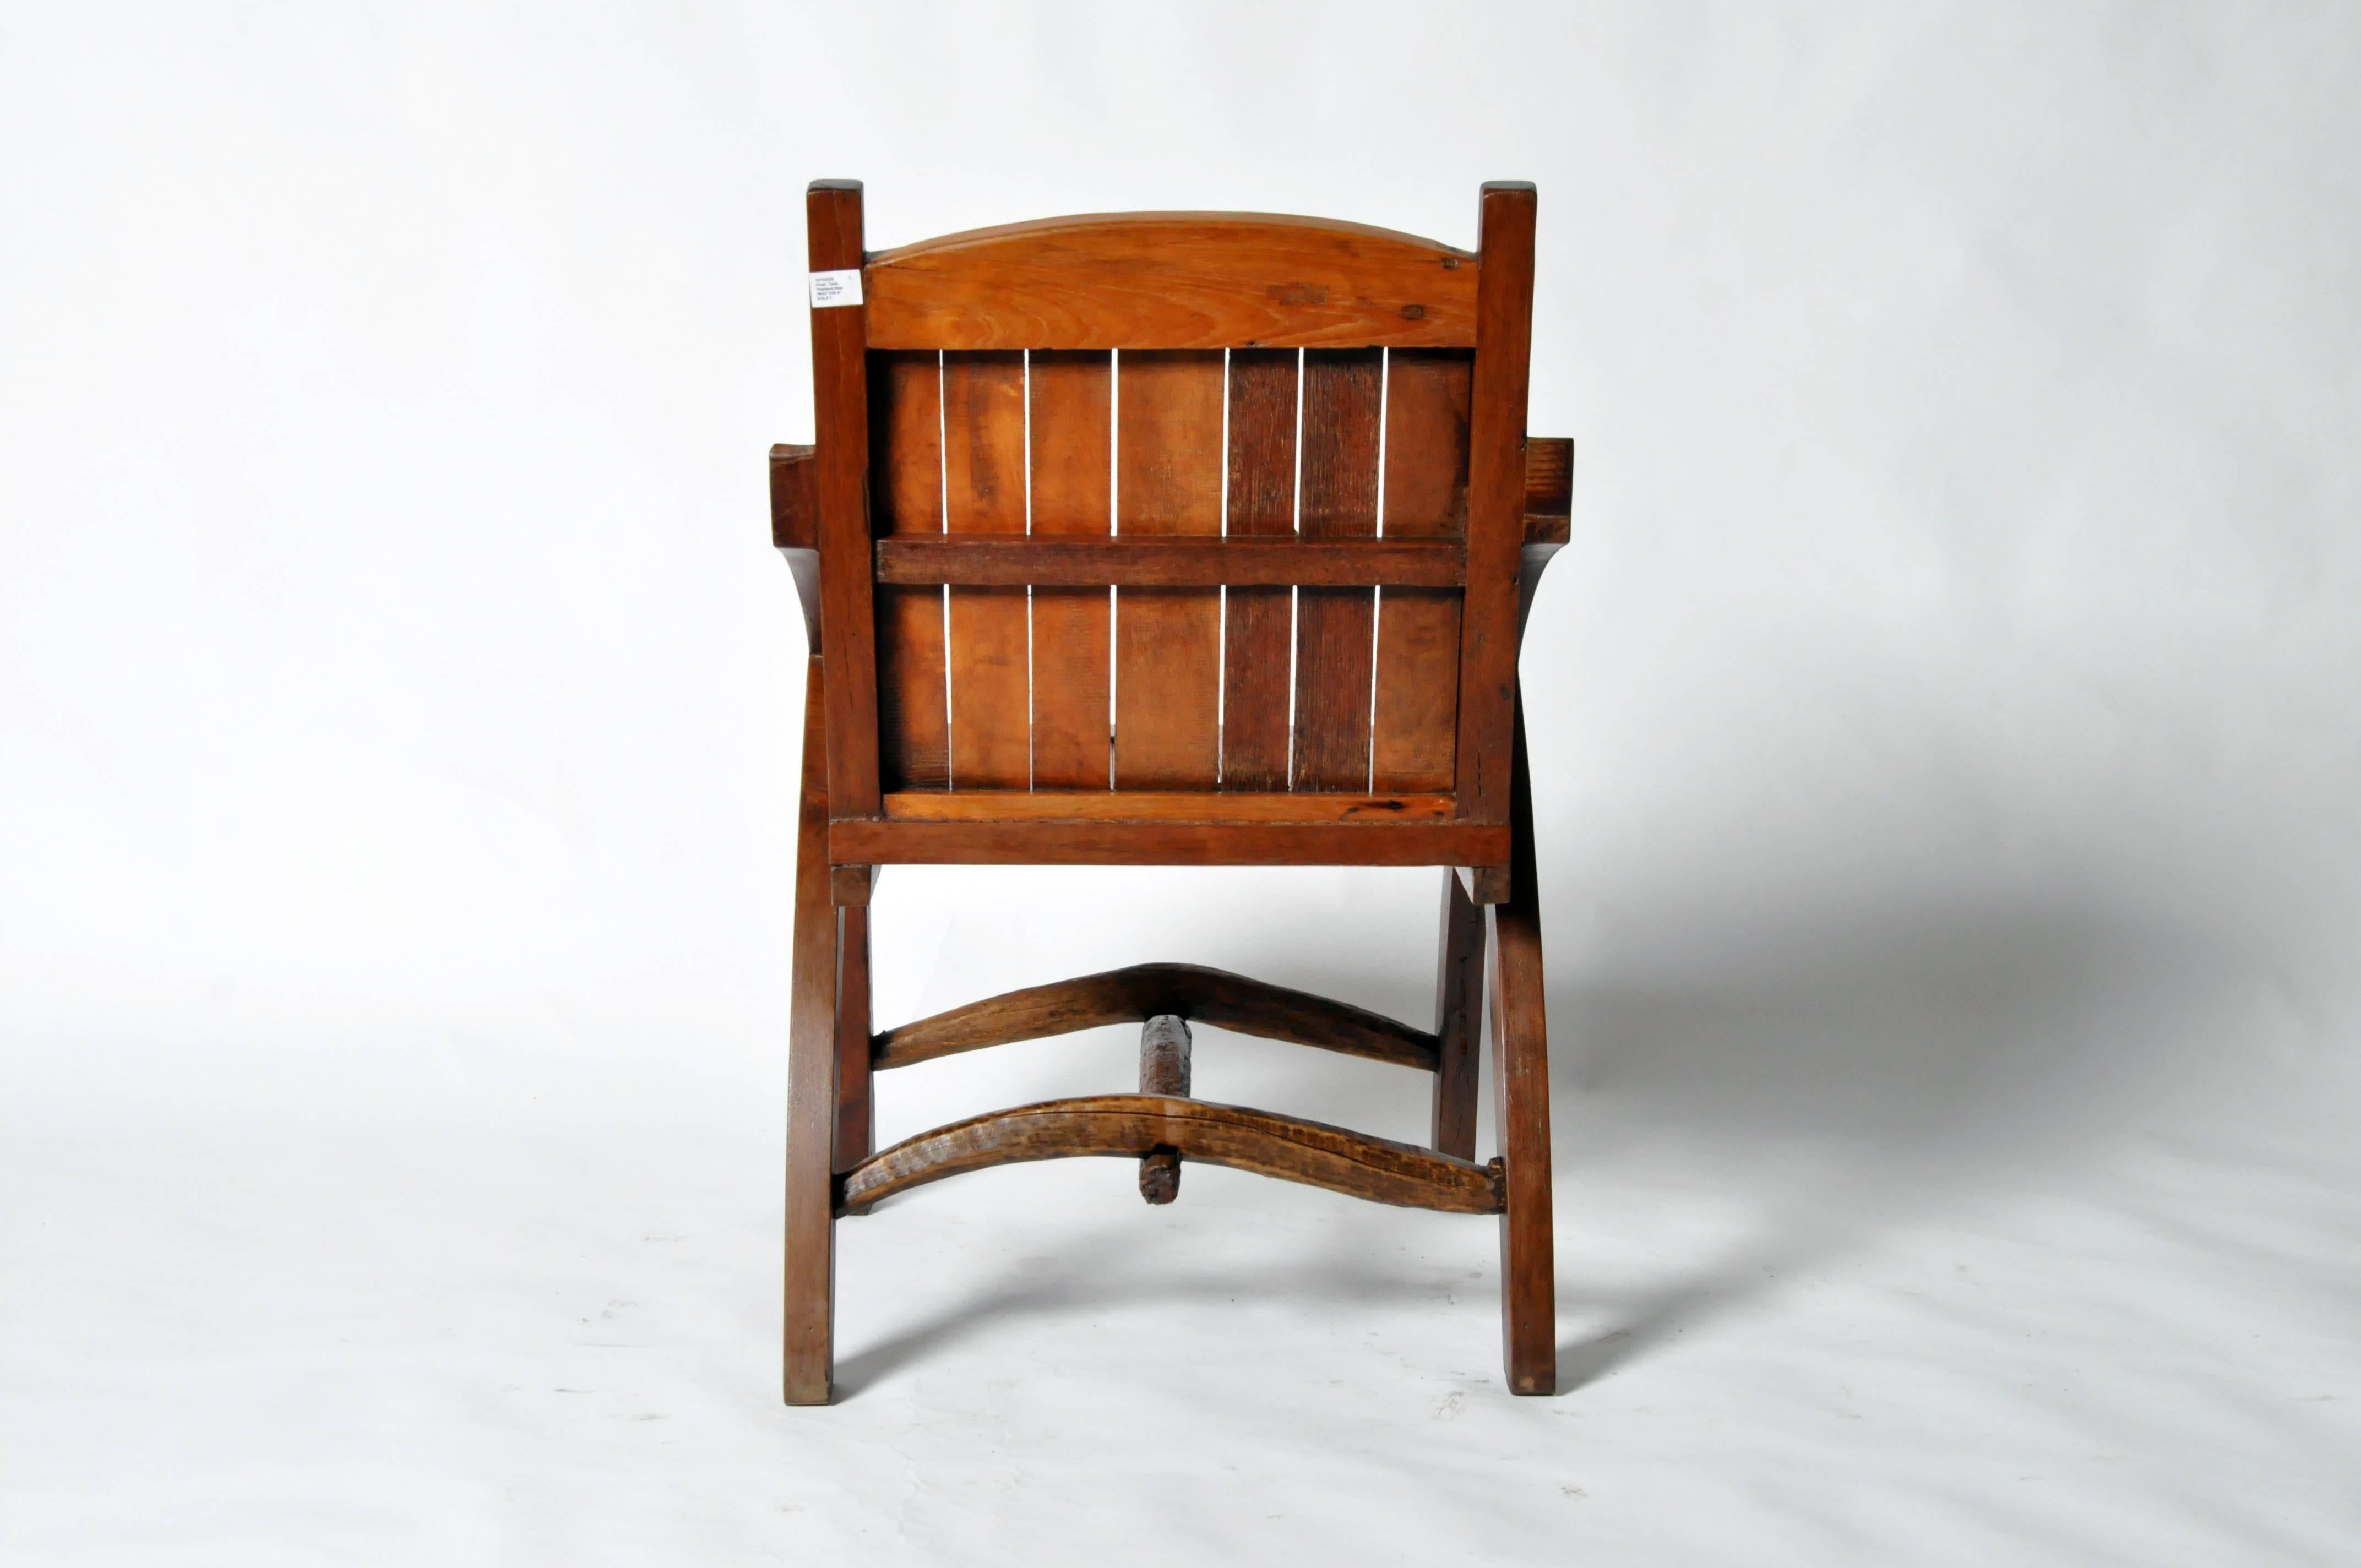 Contemporary Rustic Chair